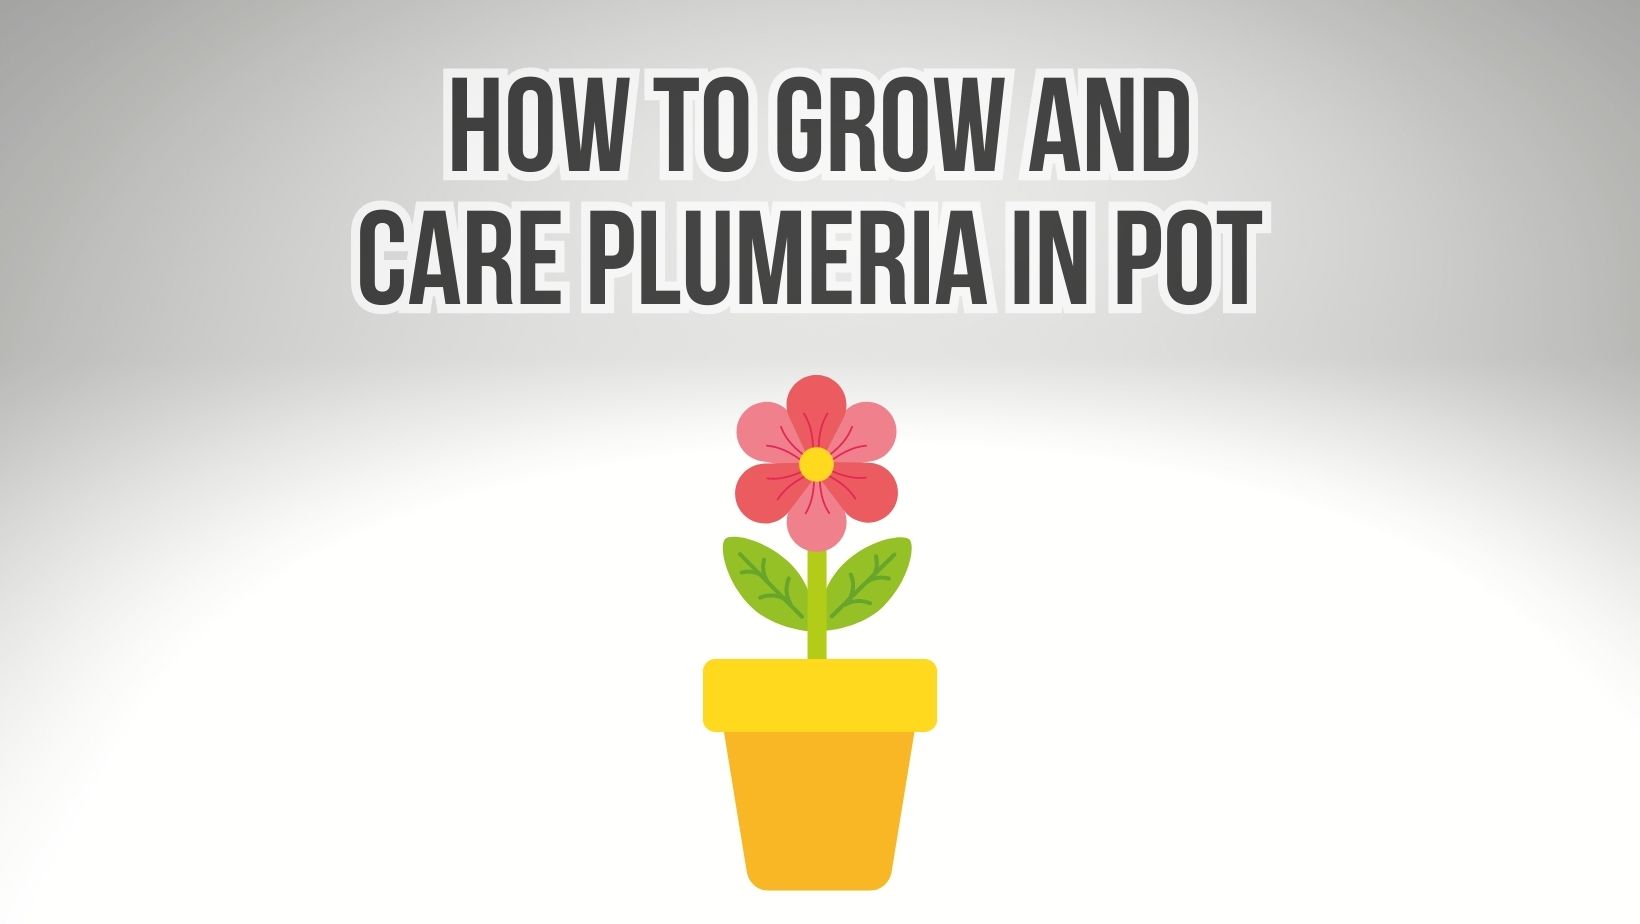 How To Grow and Care Plumeria In A Pot? Guide 101 - Plumeria Guy